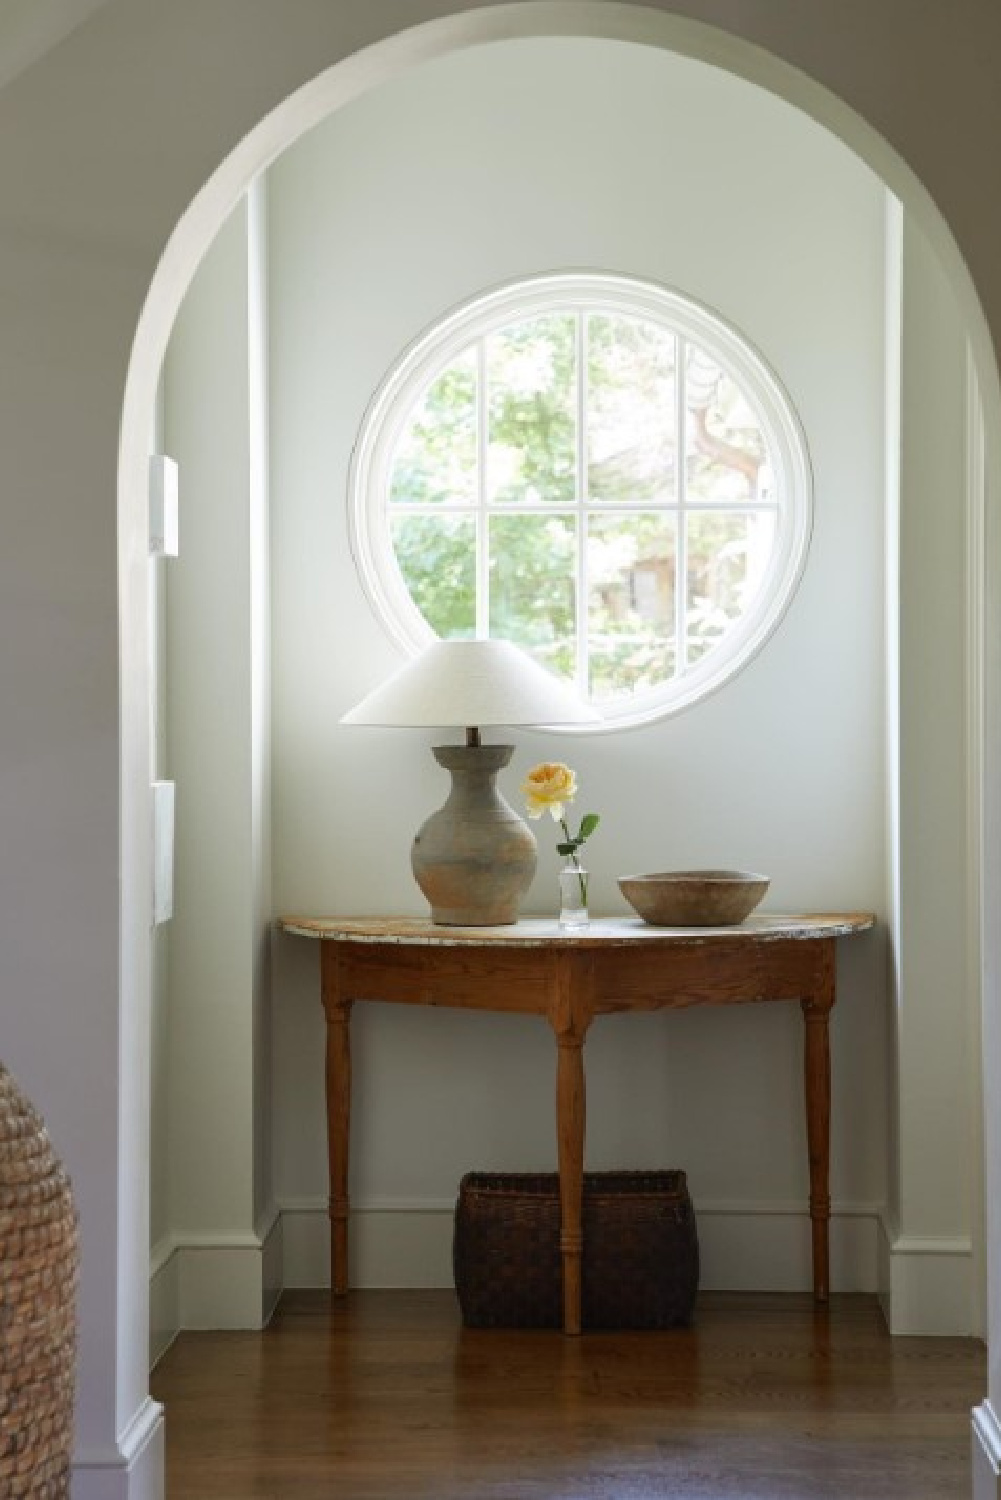 Round window and demilune table. Timeless interior design by Shannon Bowers with nods to European antiques, patina, understated elegance, and sophisticated simplicity. #shannonbowers #timelessinteriors